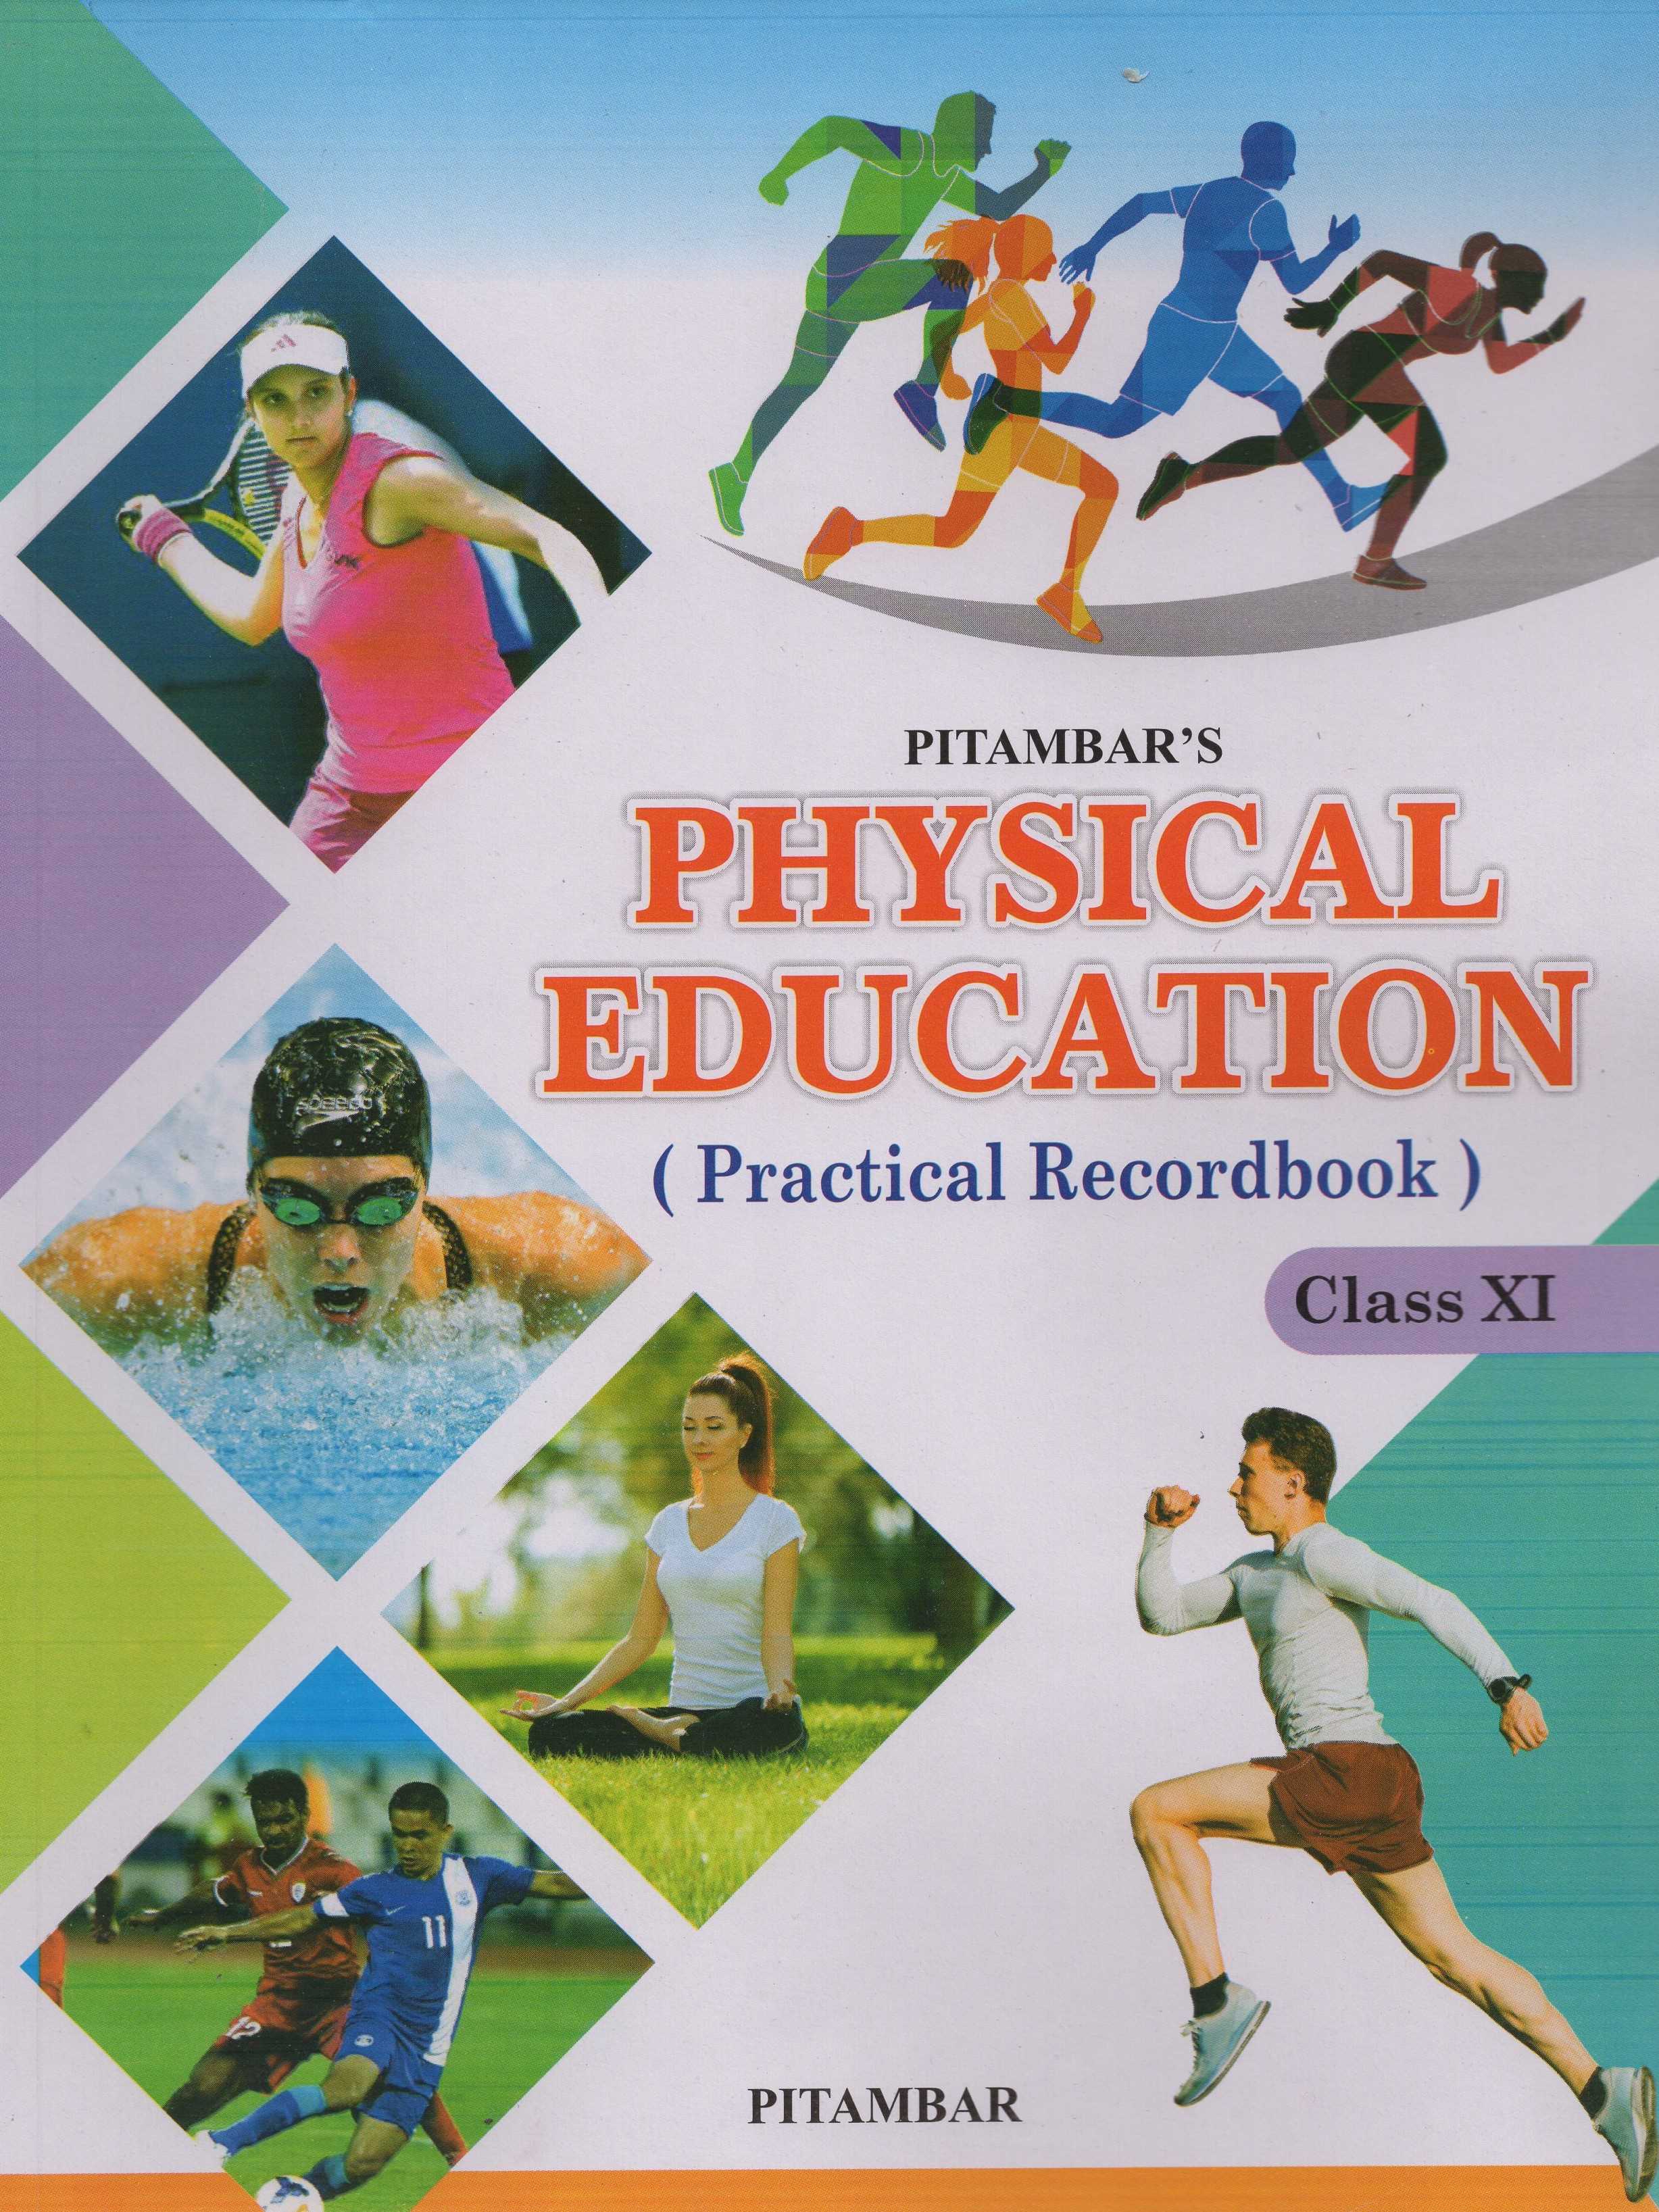 PHYSICAL EDUCATION (PRACTICE RECORDBOOK) FOR CLASS - XI